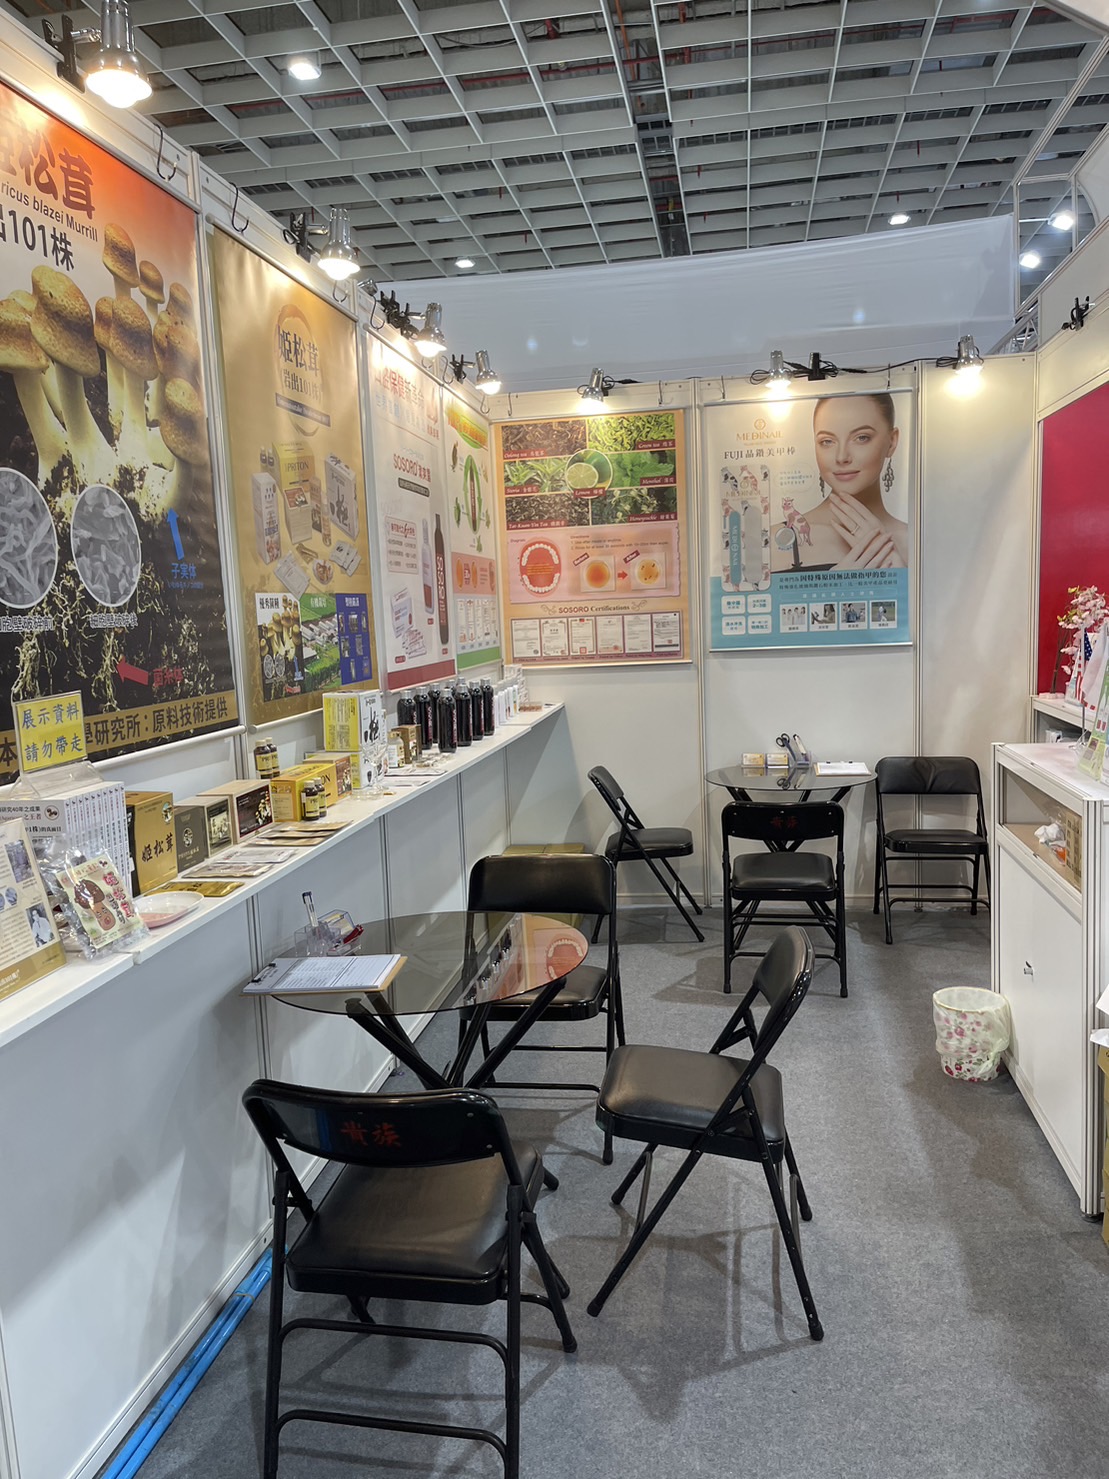 Asia Healthcare & Medical Cosmetology Expo